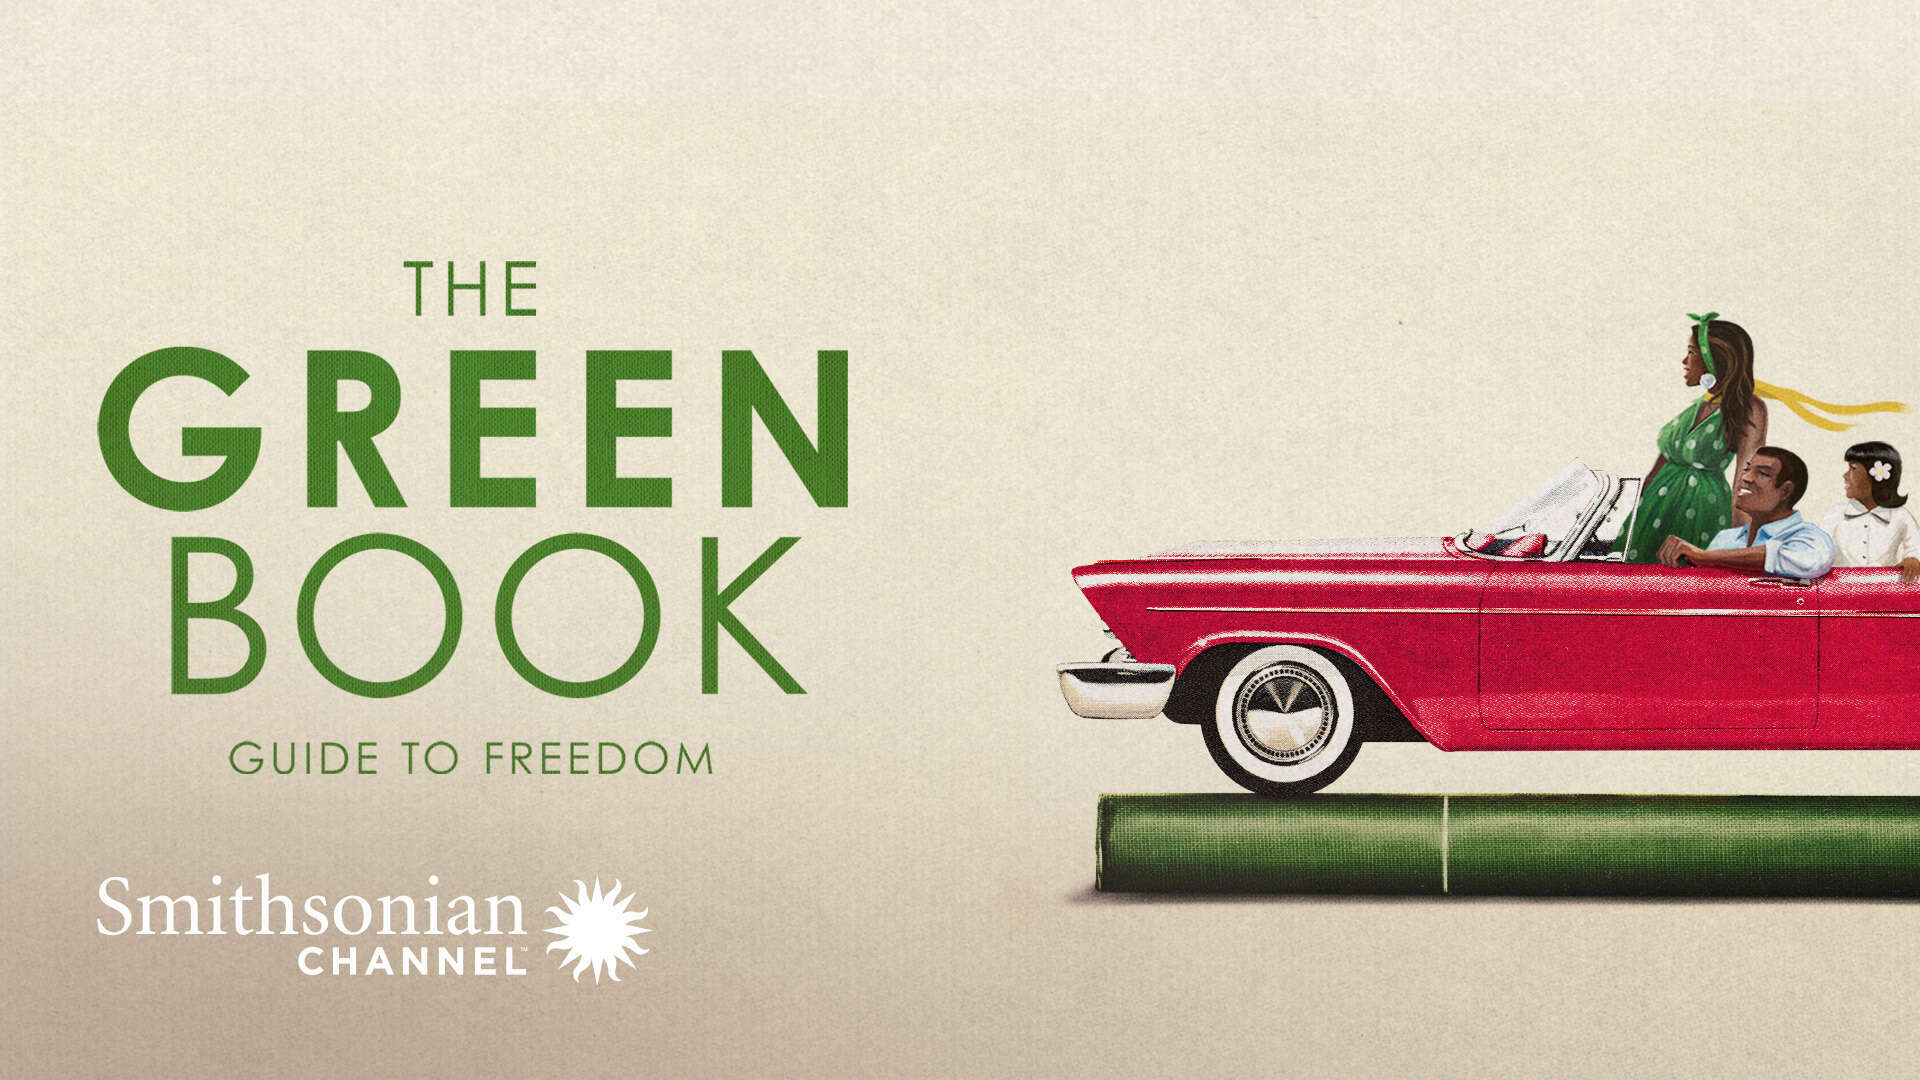 Promotional image for movie, The Green Book: Guide to Freedom. Shows a family riding in a vintage convertible.